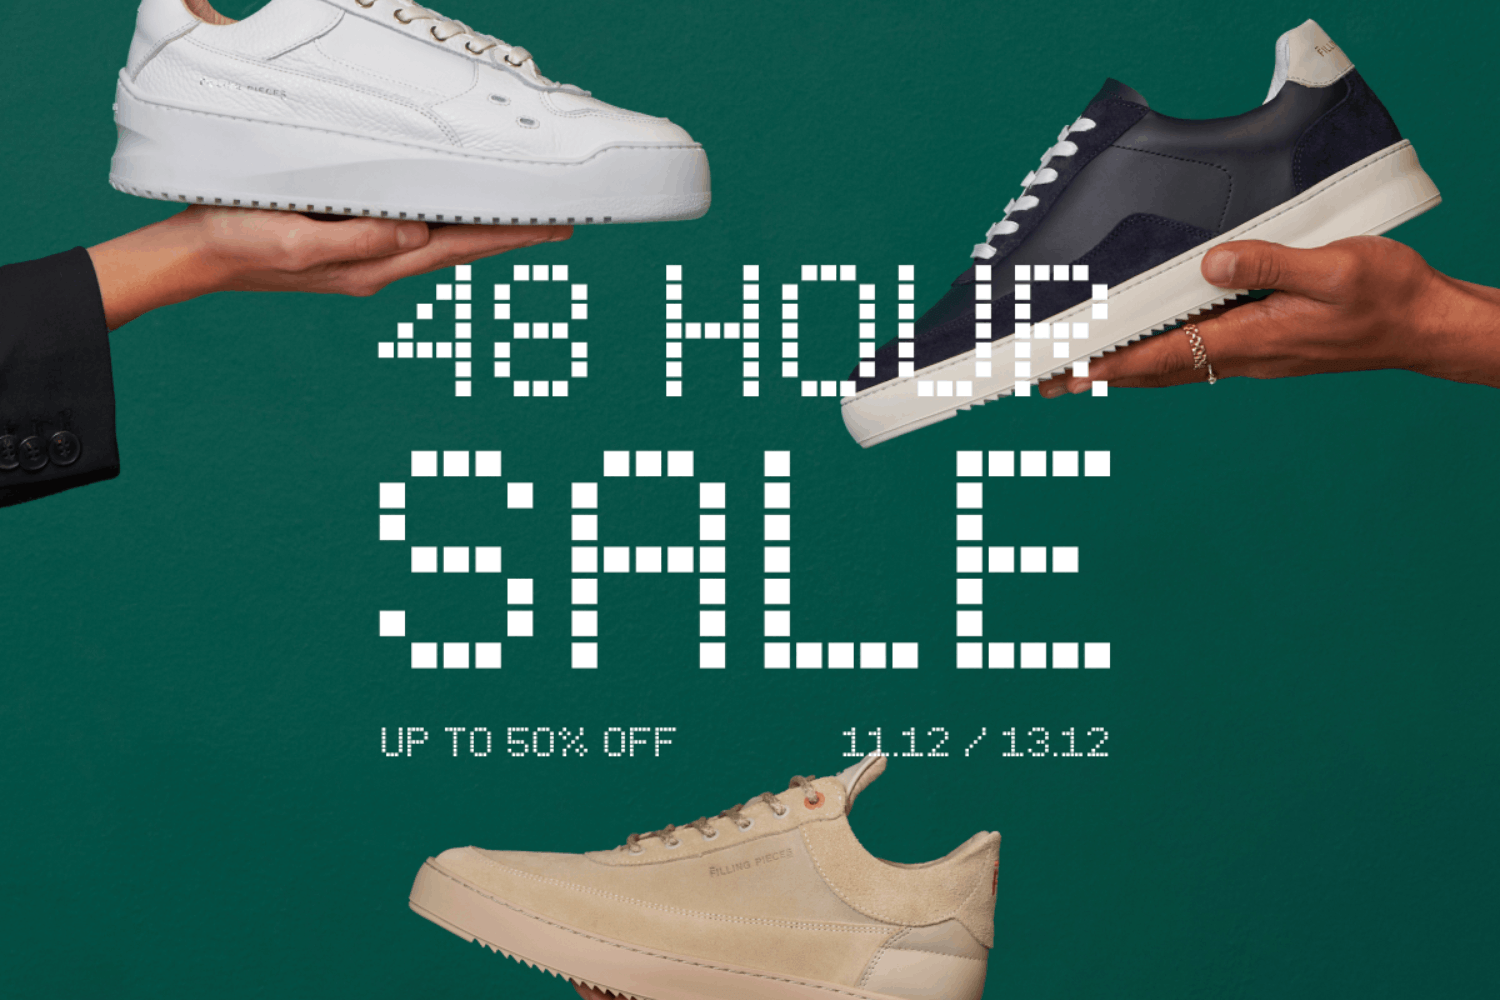 The Filling Pieces 48 Hour Sale has started